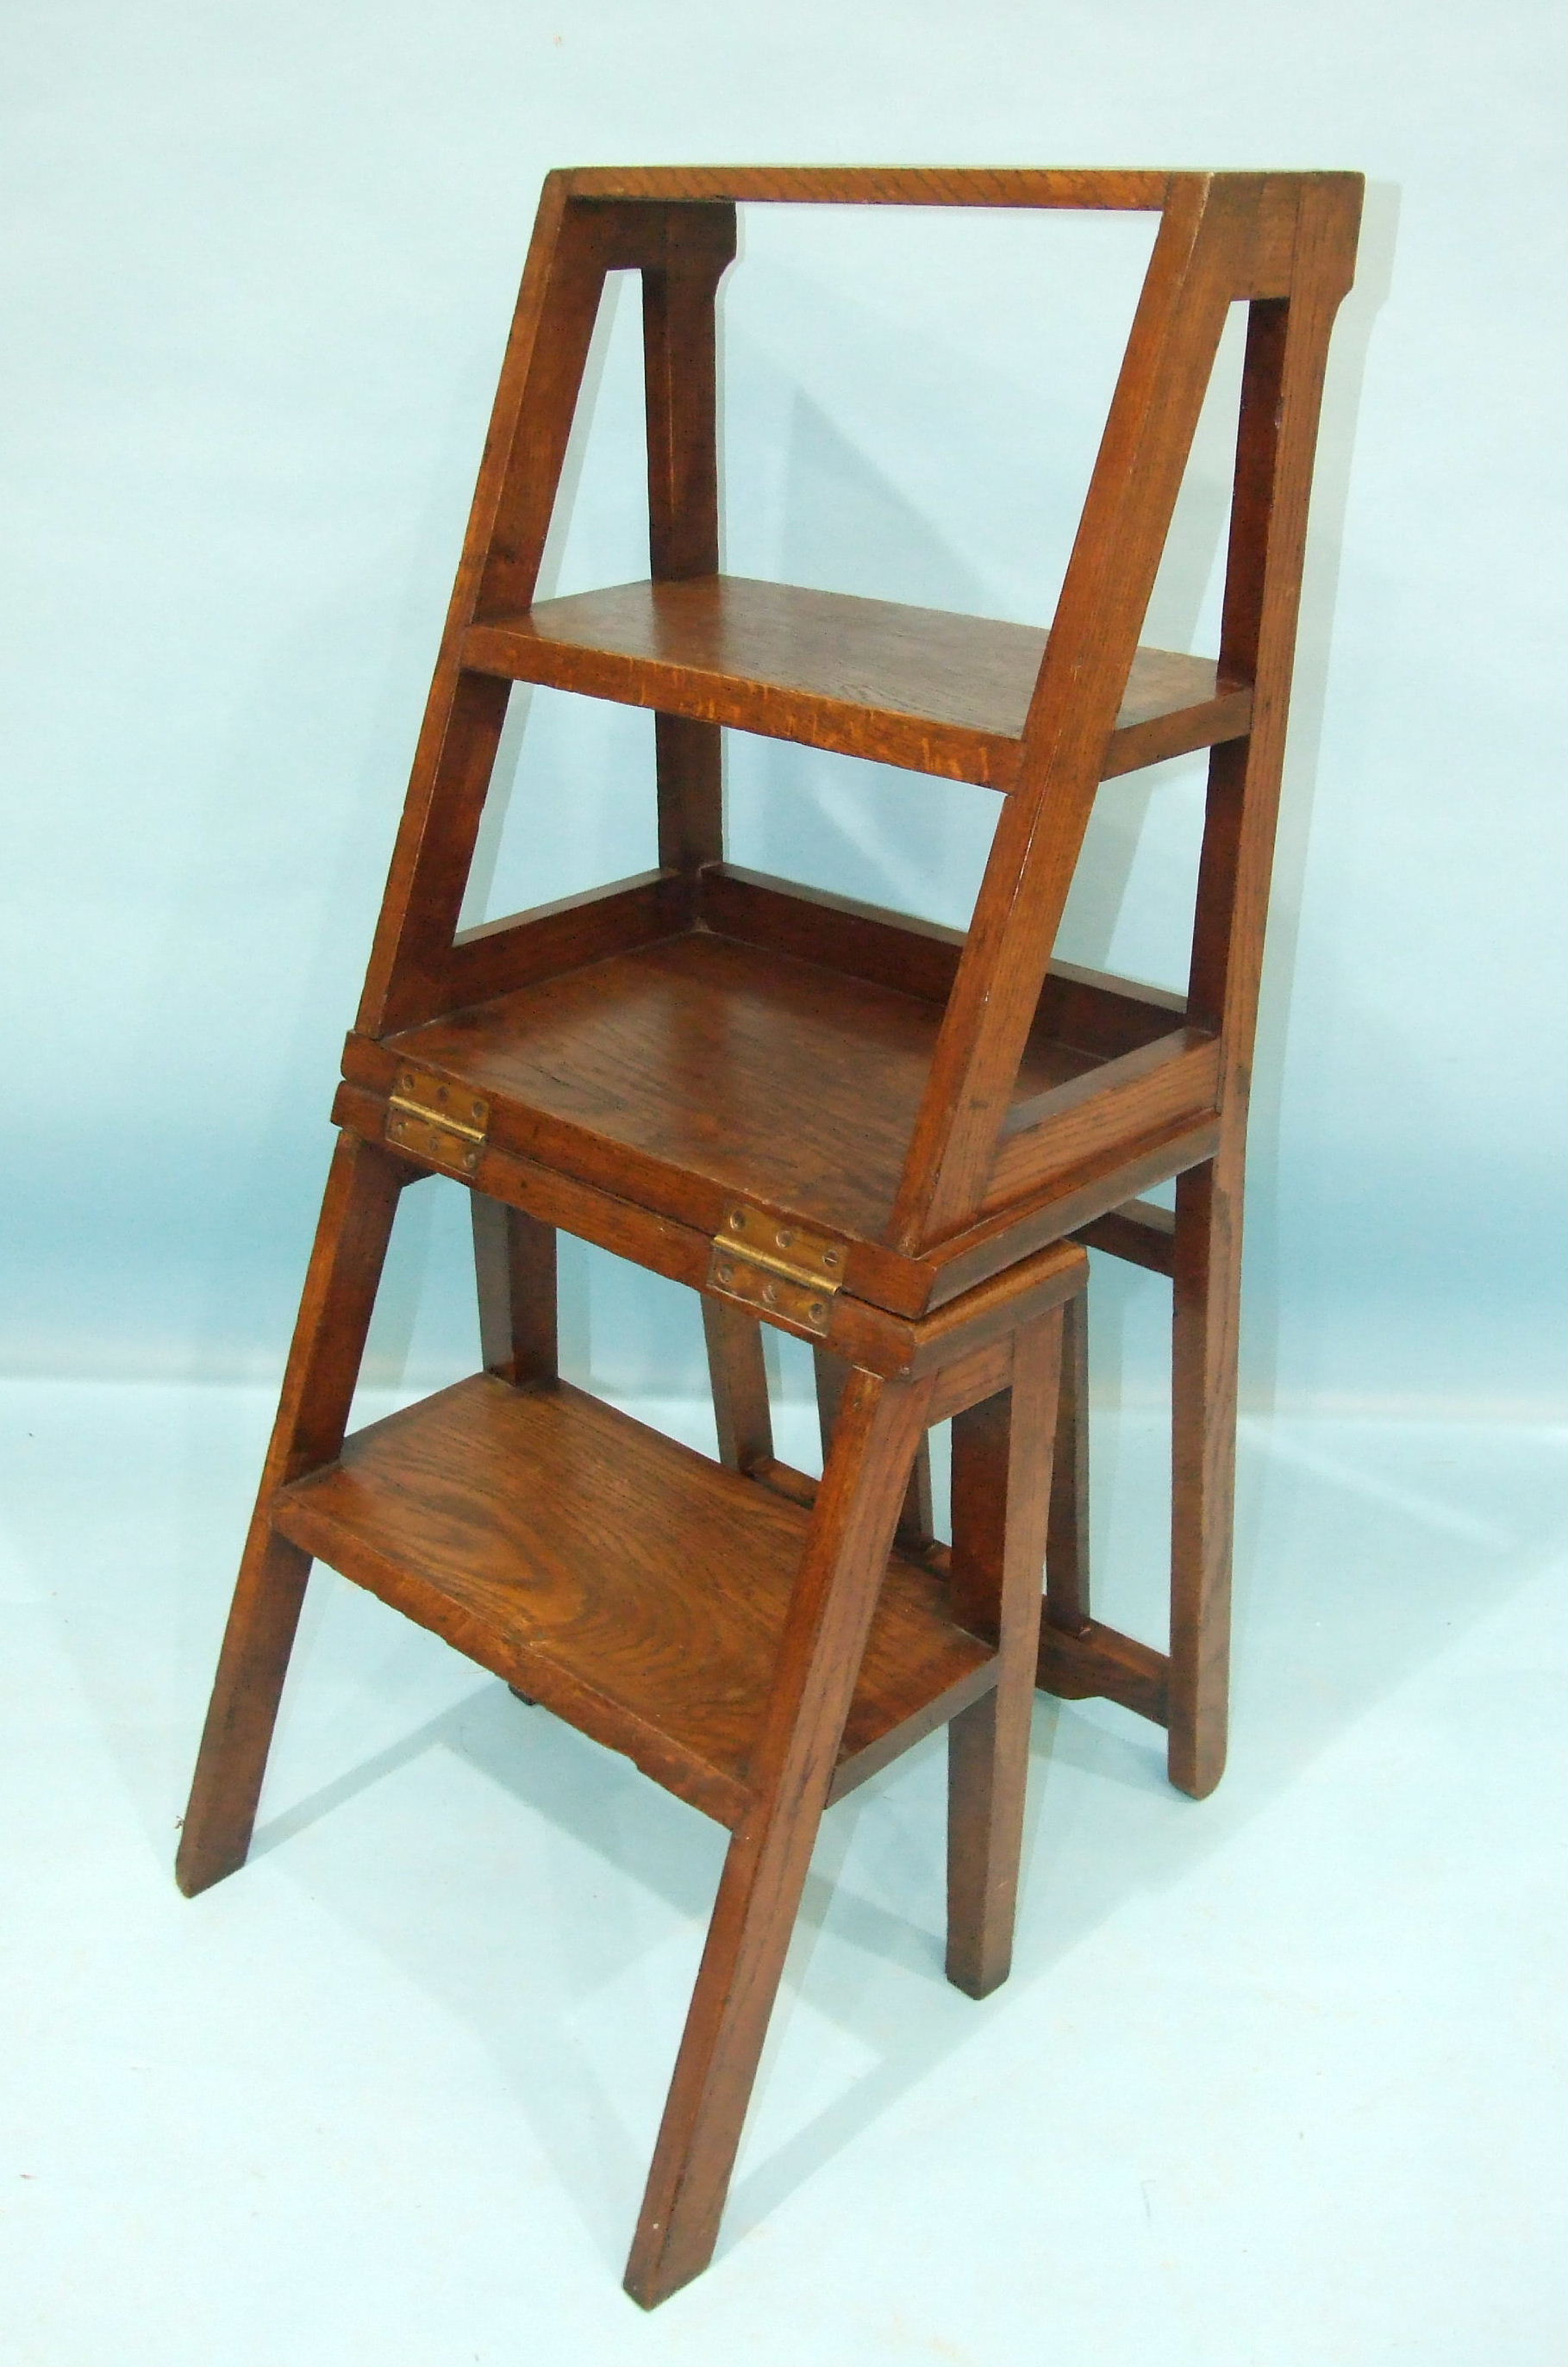 A late-19th century oak metamorphic chair/library steps.